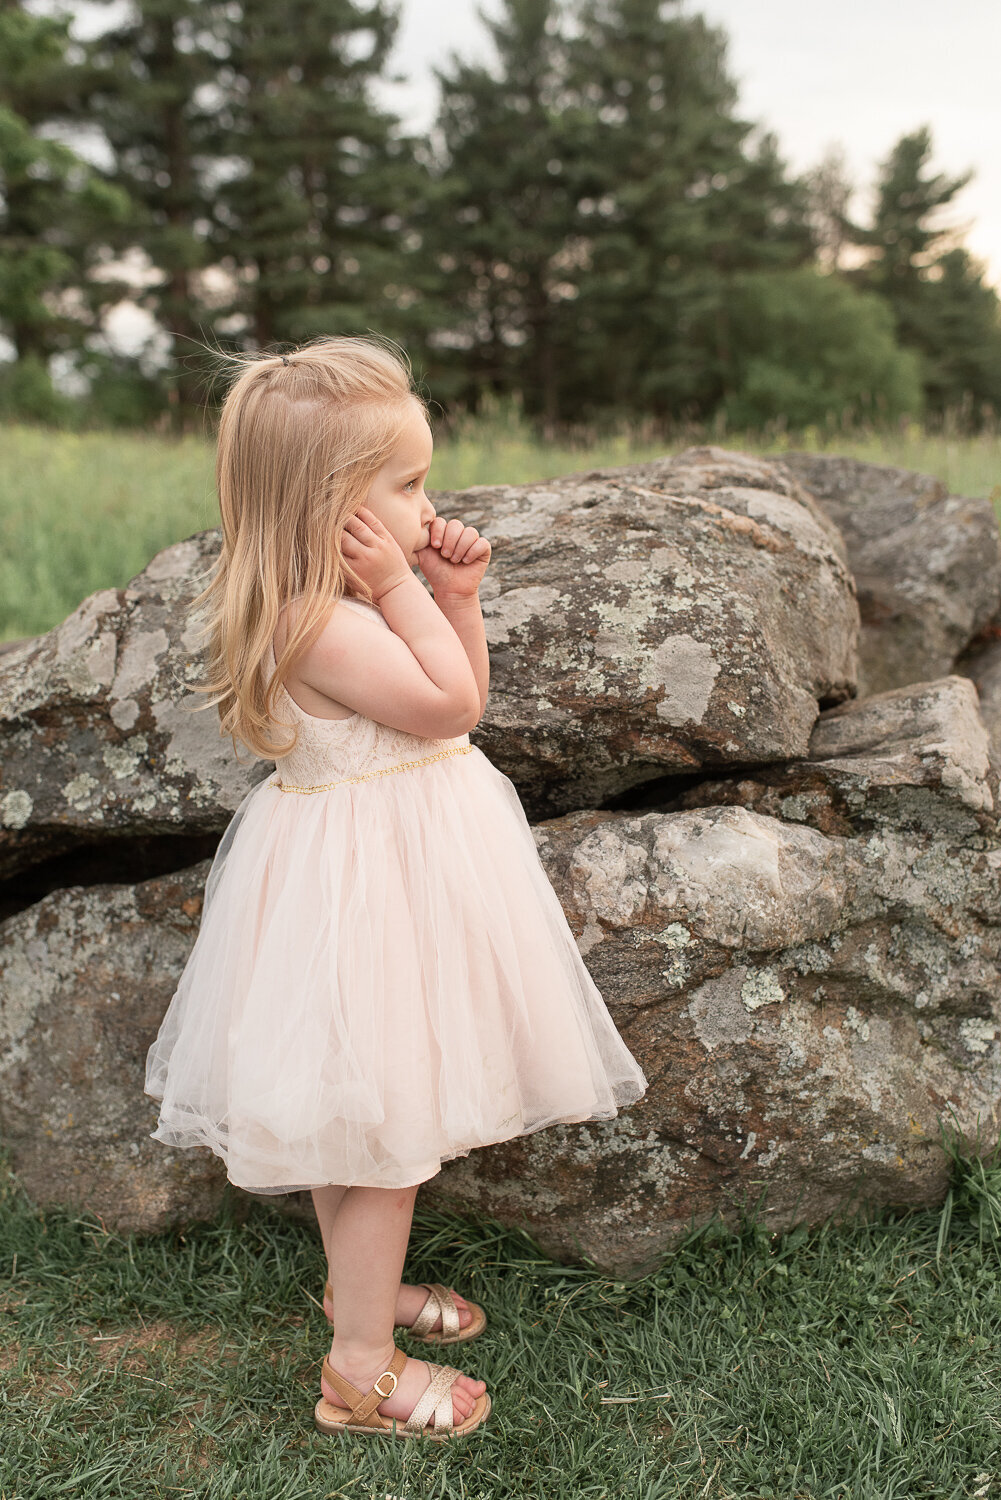 Little girl sucking thumb and looking out over field in Litchfield, Connecticut |Sharon Leger Photography | Canton, CT Newborn & Family Photographer